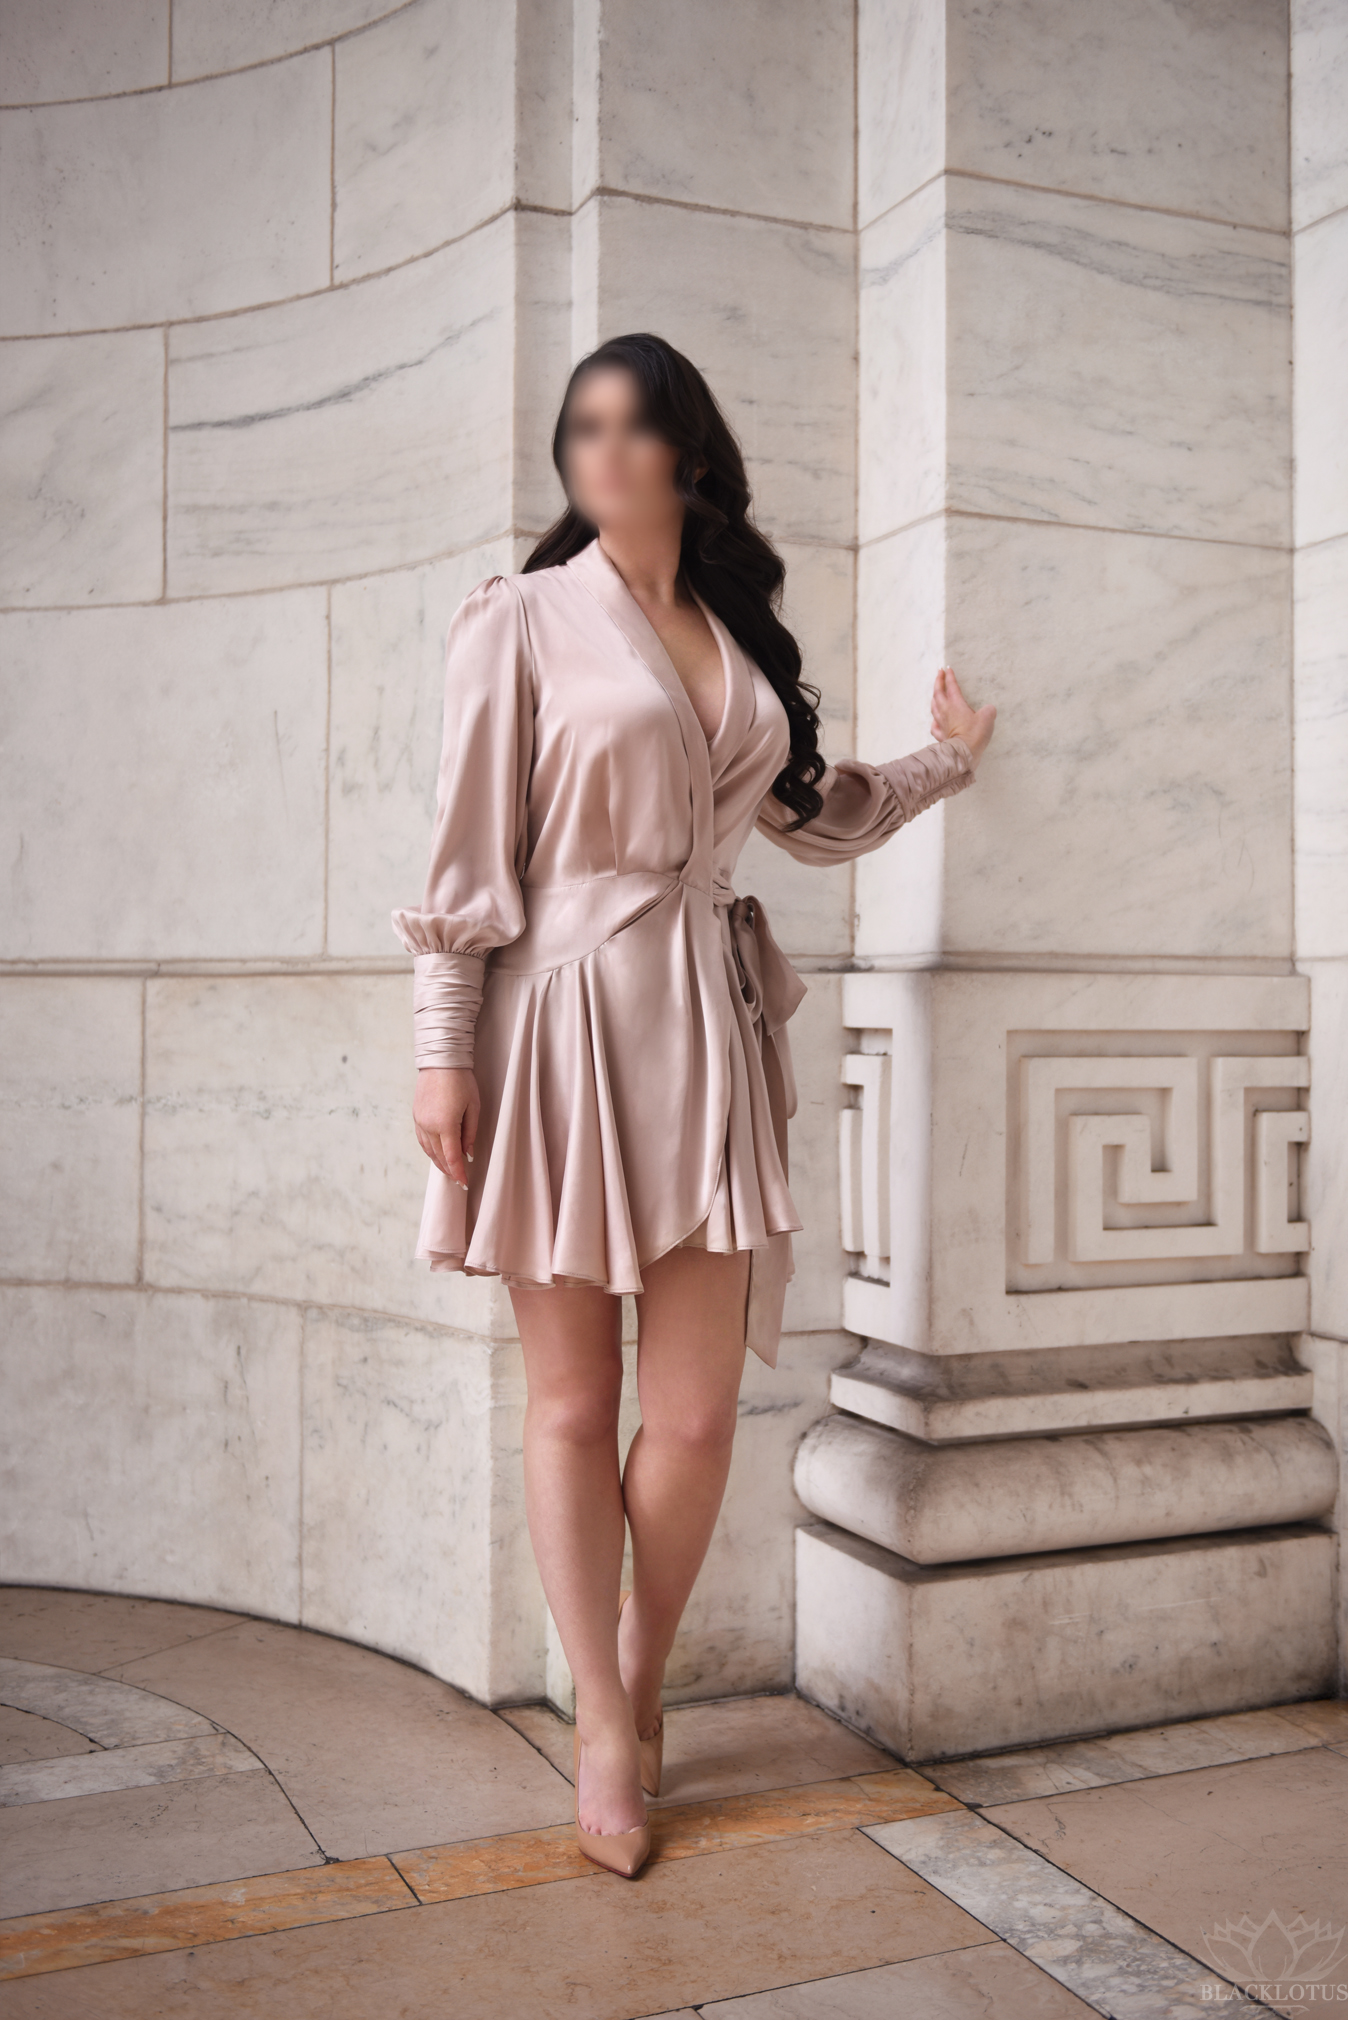 Bryleigh stands next to a marble pillar, her long dark hair cascades over her left shoulder and she gazes slightly to the right. She is wearing a pink silk wrap dress with long sleeves.